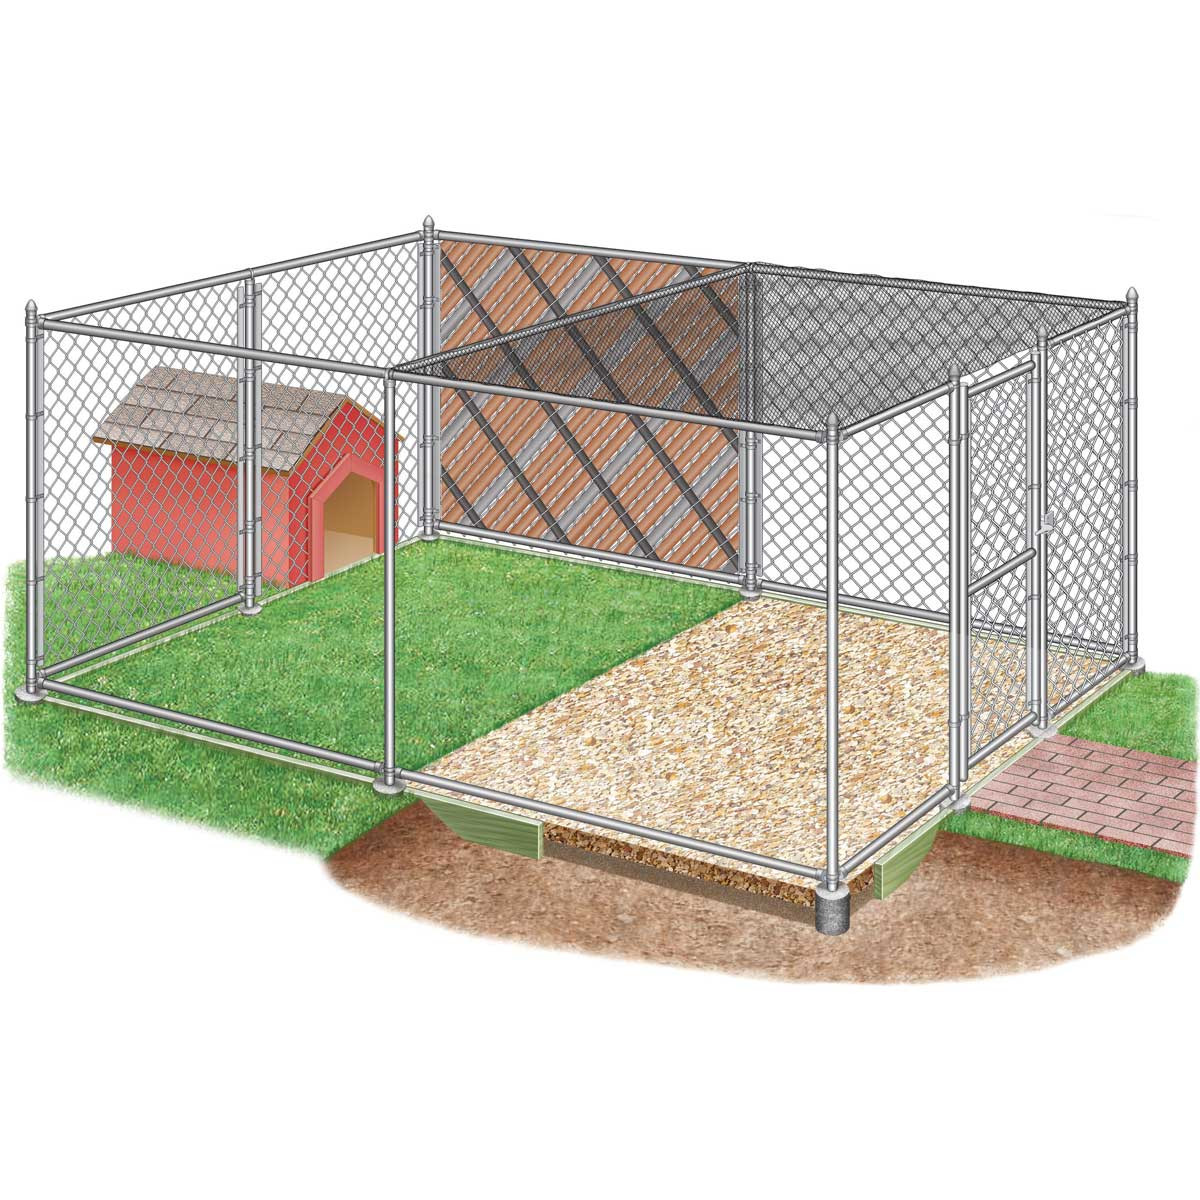 DIY Dog Pen
 How to Build Chain Link Outdoor Dog Kennels